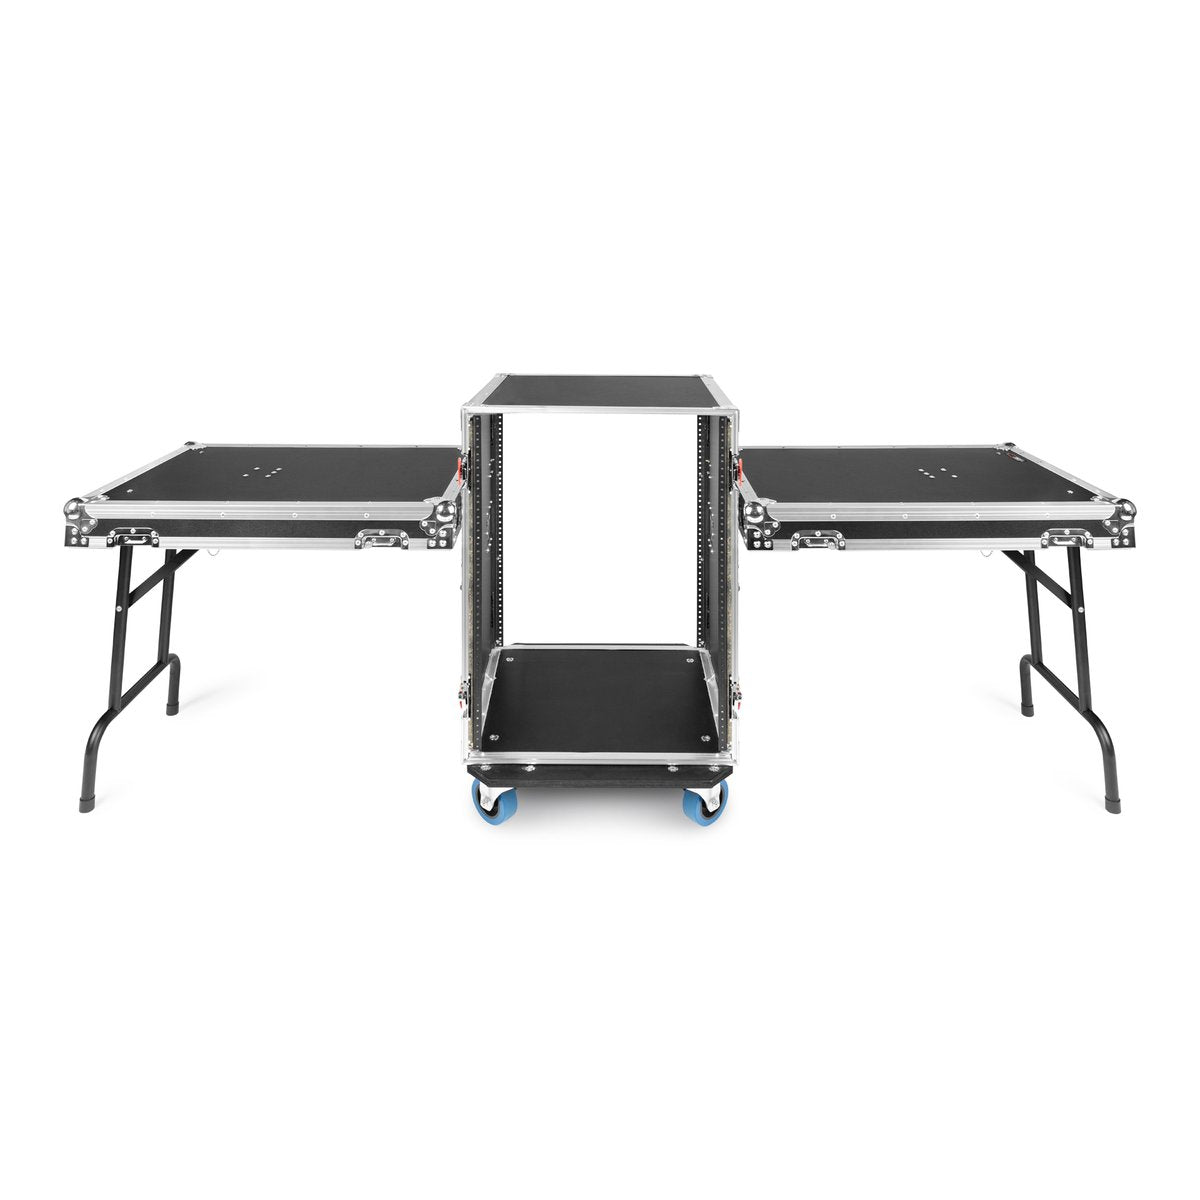 16U Tour Style ATA Road Rack Case with Dual Fold-Out Side Tables & Casters